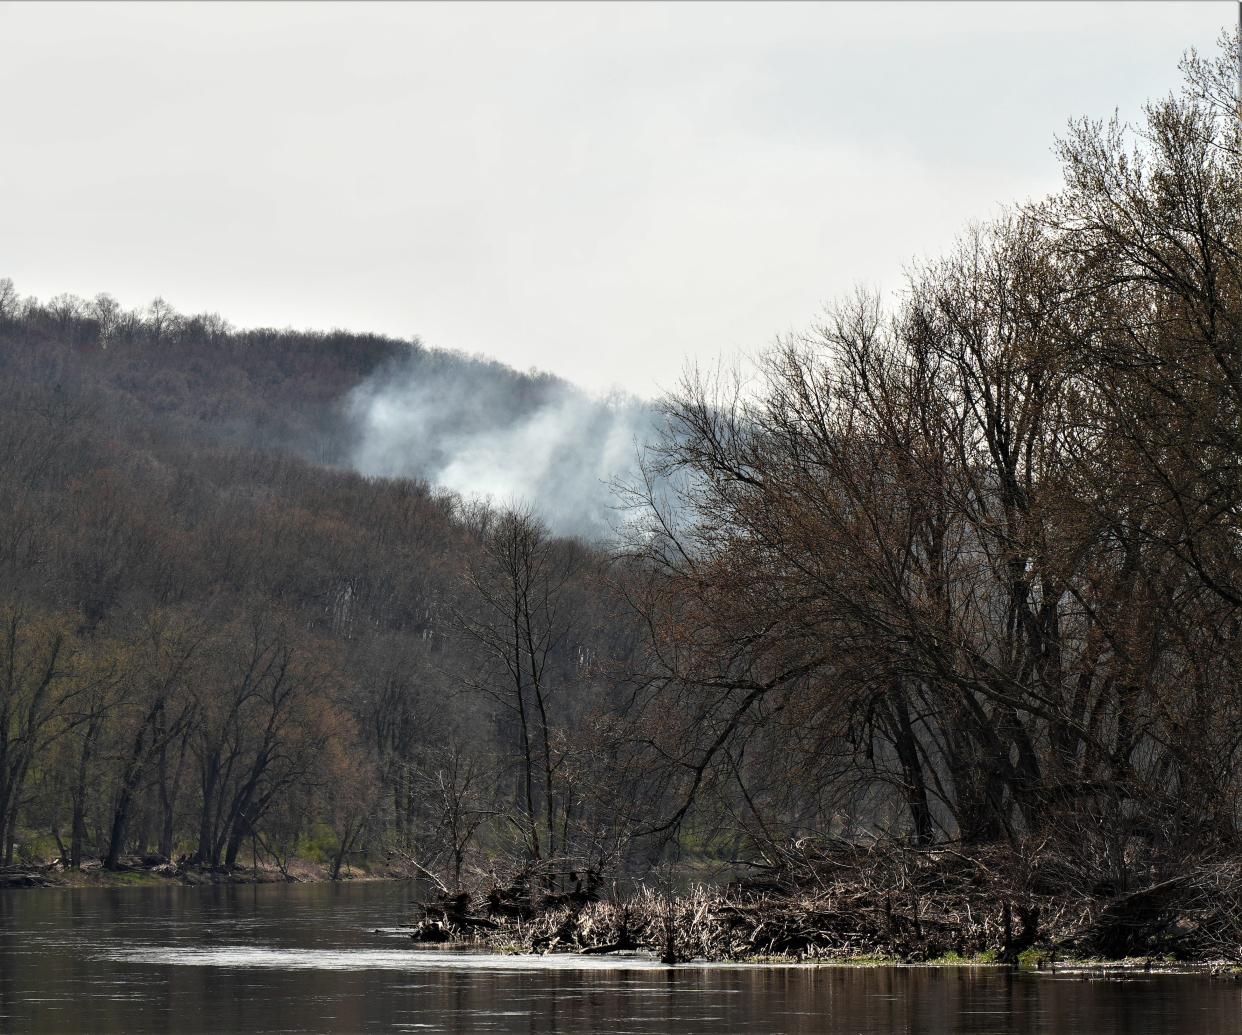 Smoke rises from a wildfire as seen from the Pennsylvania side of the Delaware River just upstream from the head of Shawnee Island. The fire was confined to a five-acre area within Worthington State Forest and was brought under control by crews from the New Jersey Forest Fire Service and the National Park Service.